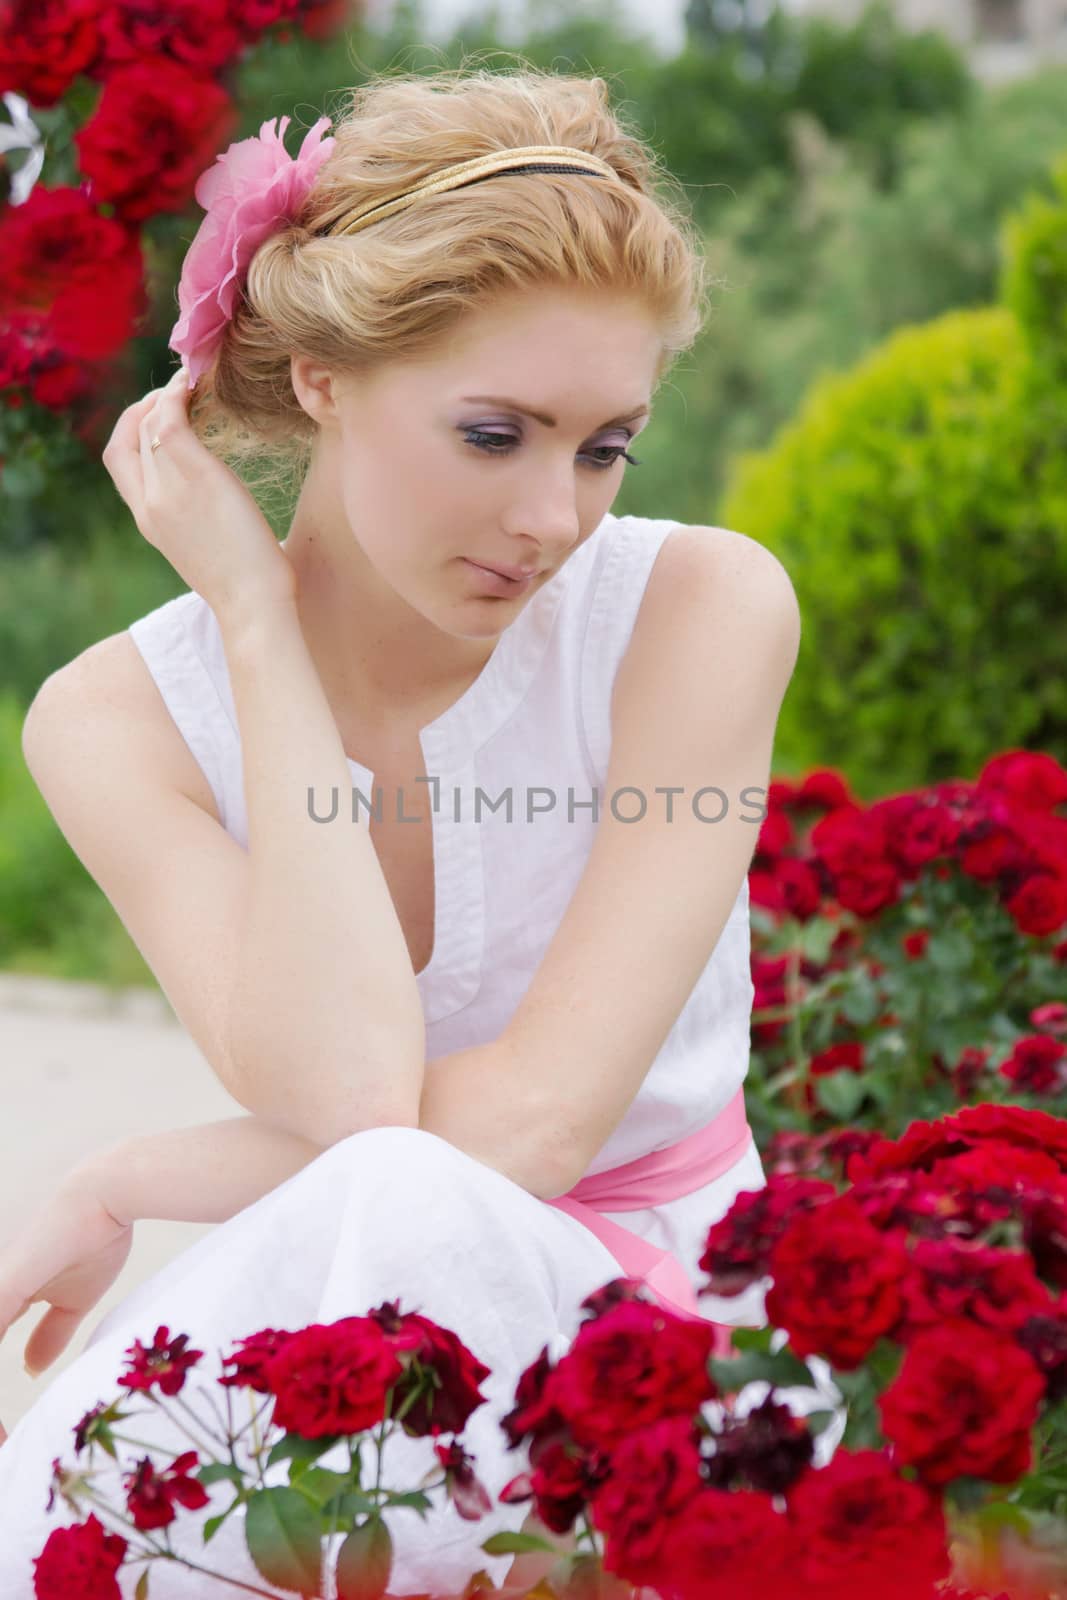 Woman sitting among pink rose garden by Angel_a